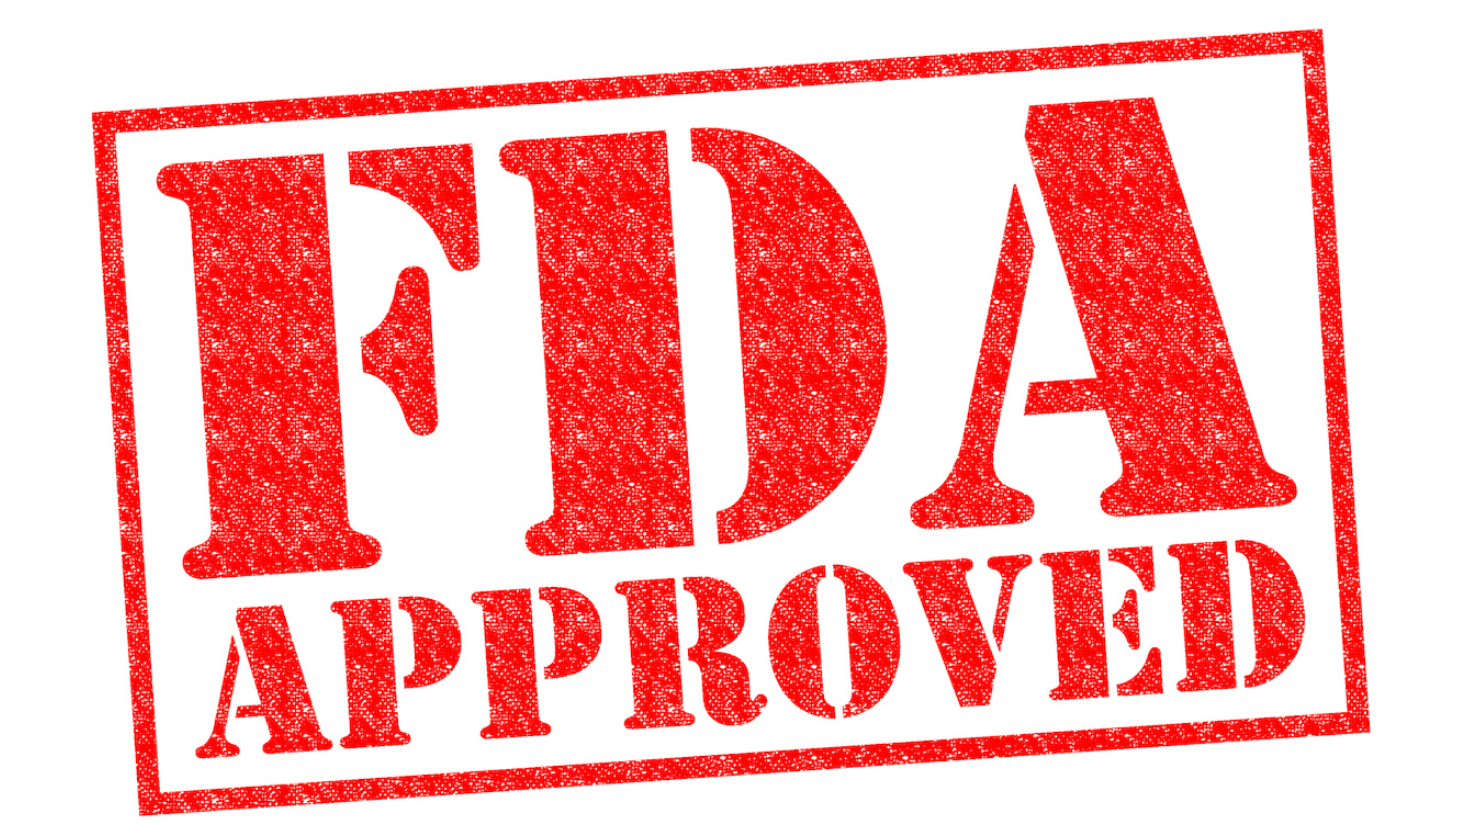 FDA Approves Trofinetide for Treatment of Rett Syndrome in Adult, Pediatric Patients